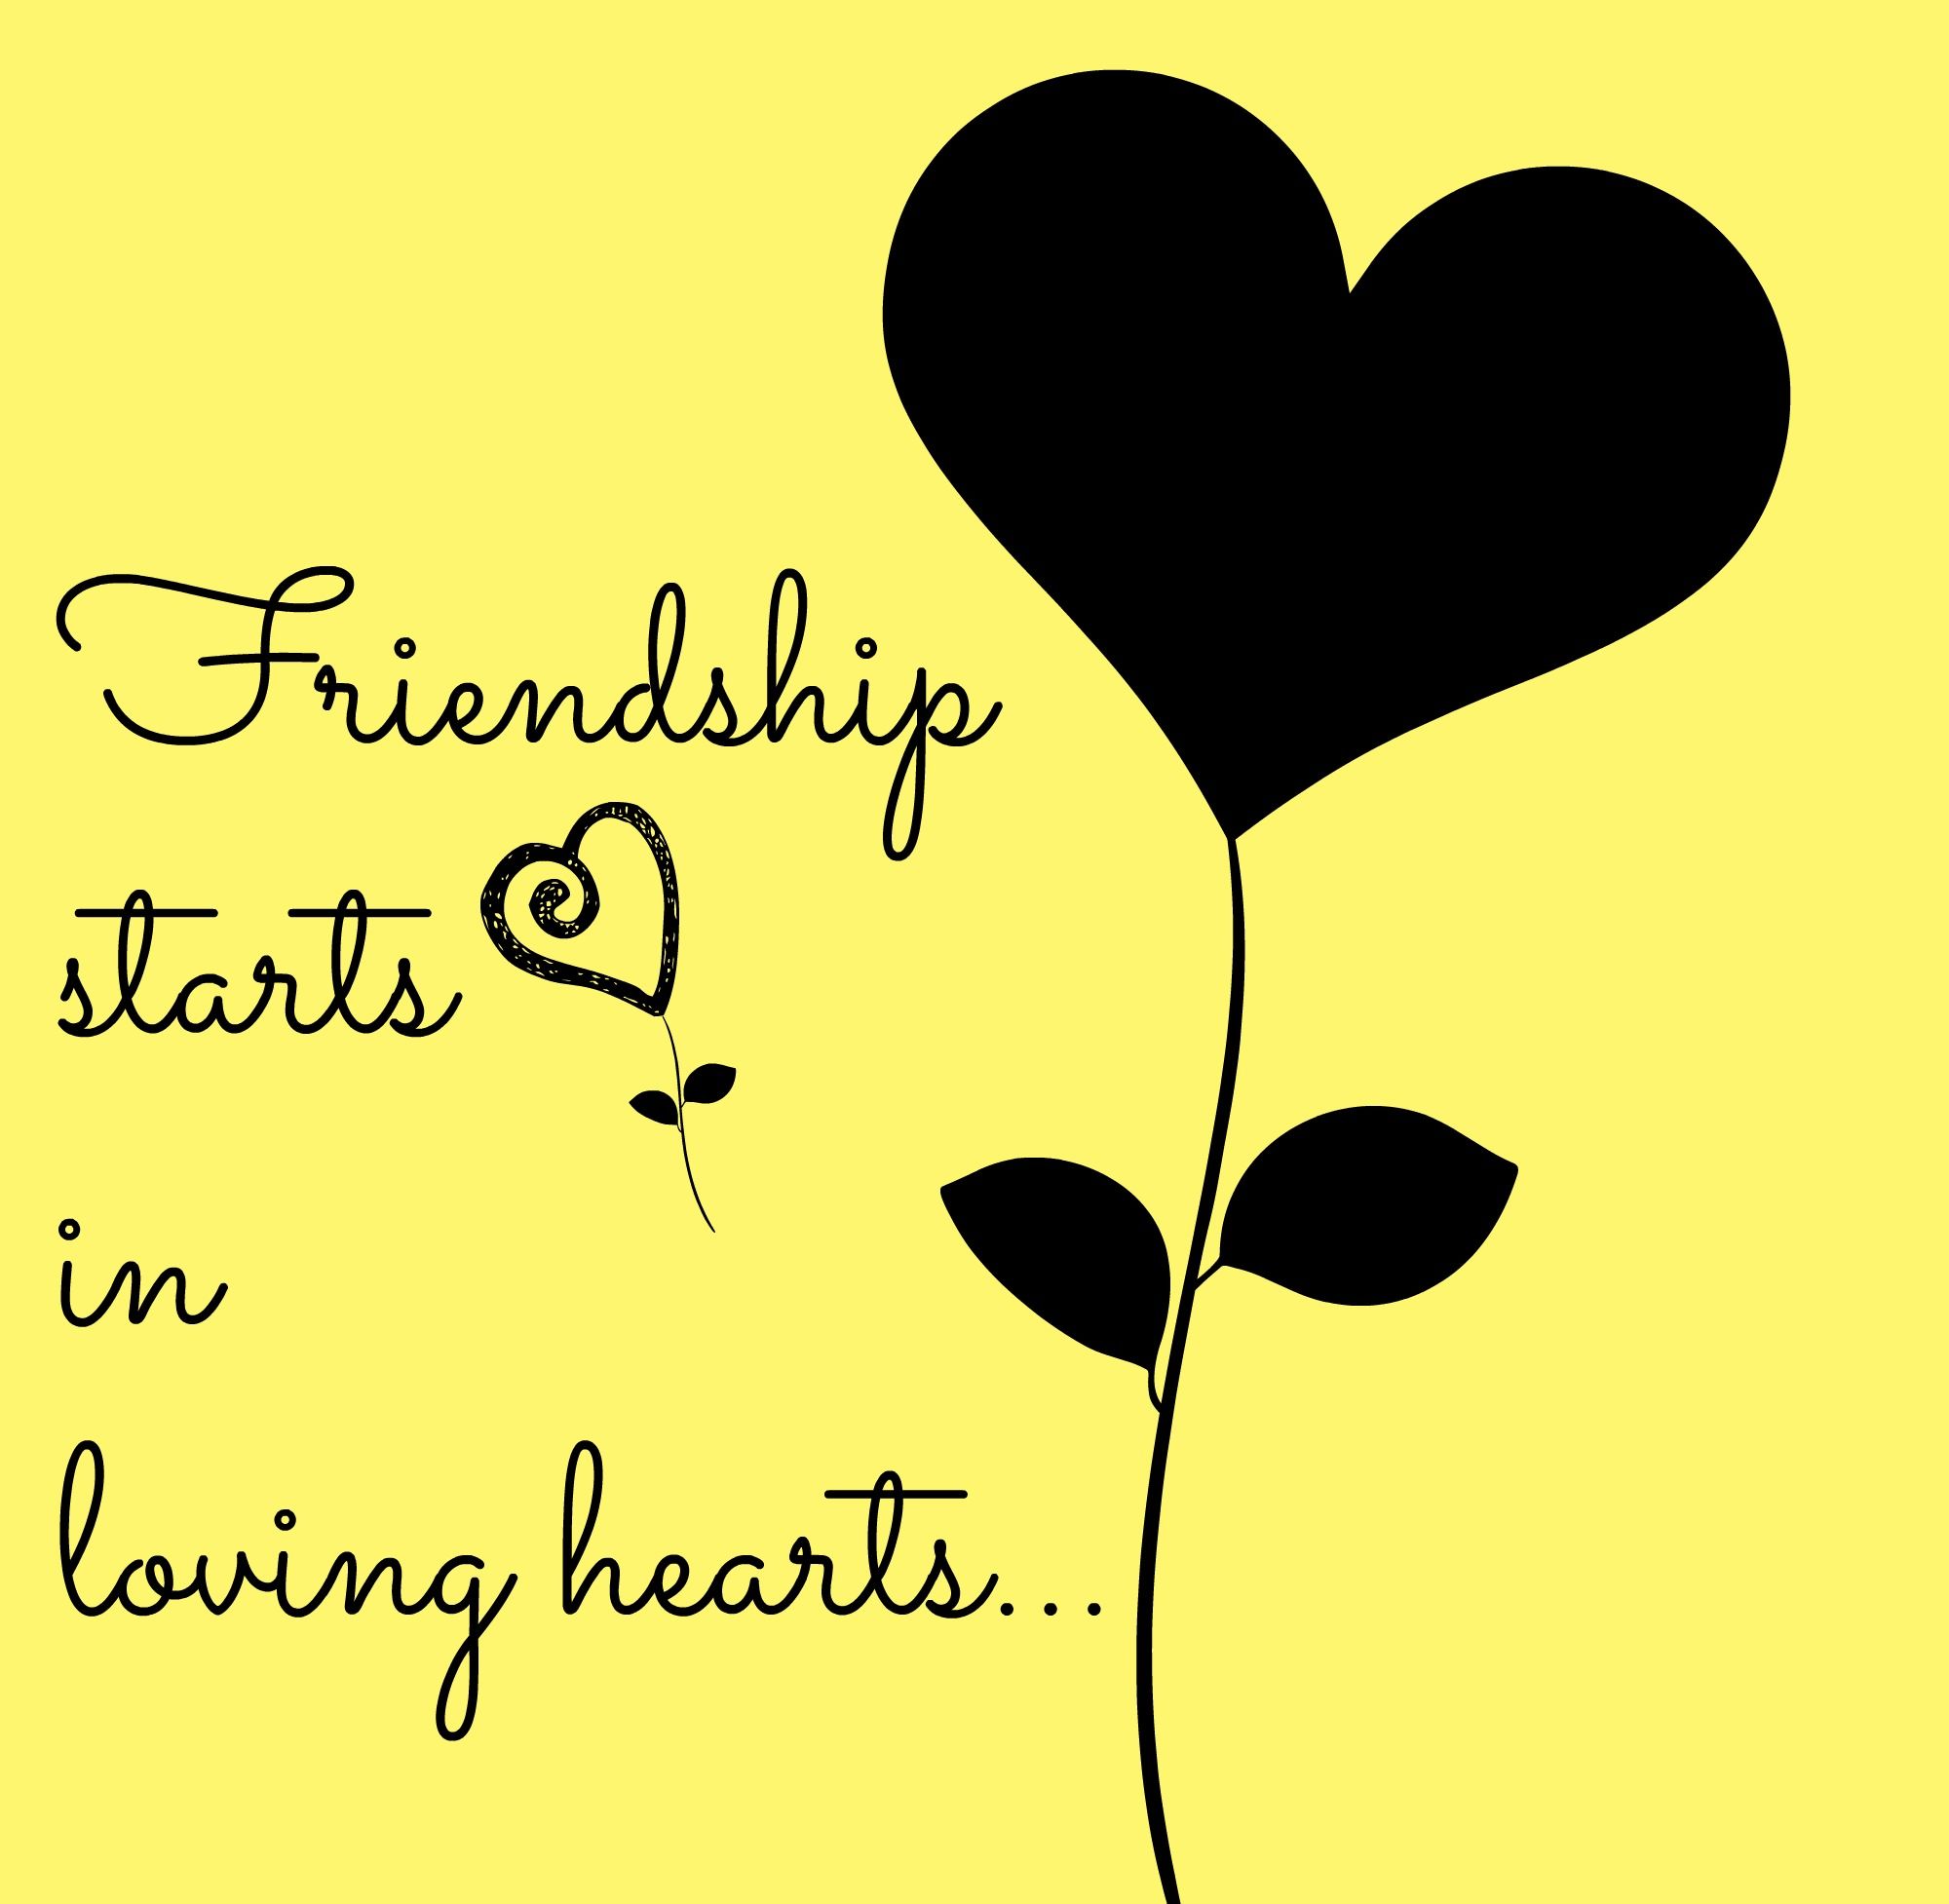 Just because. Friendship quotes image, Love